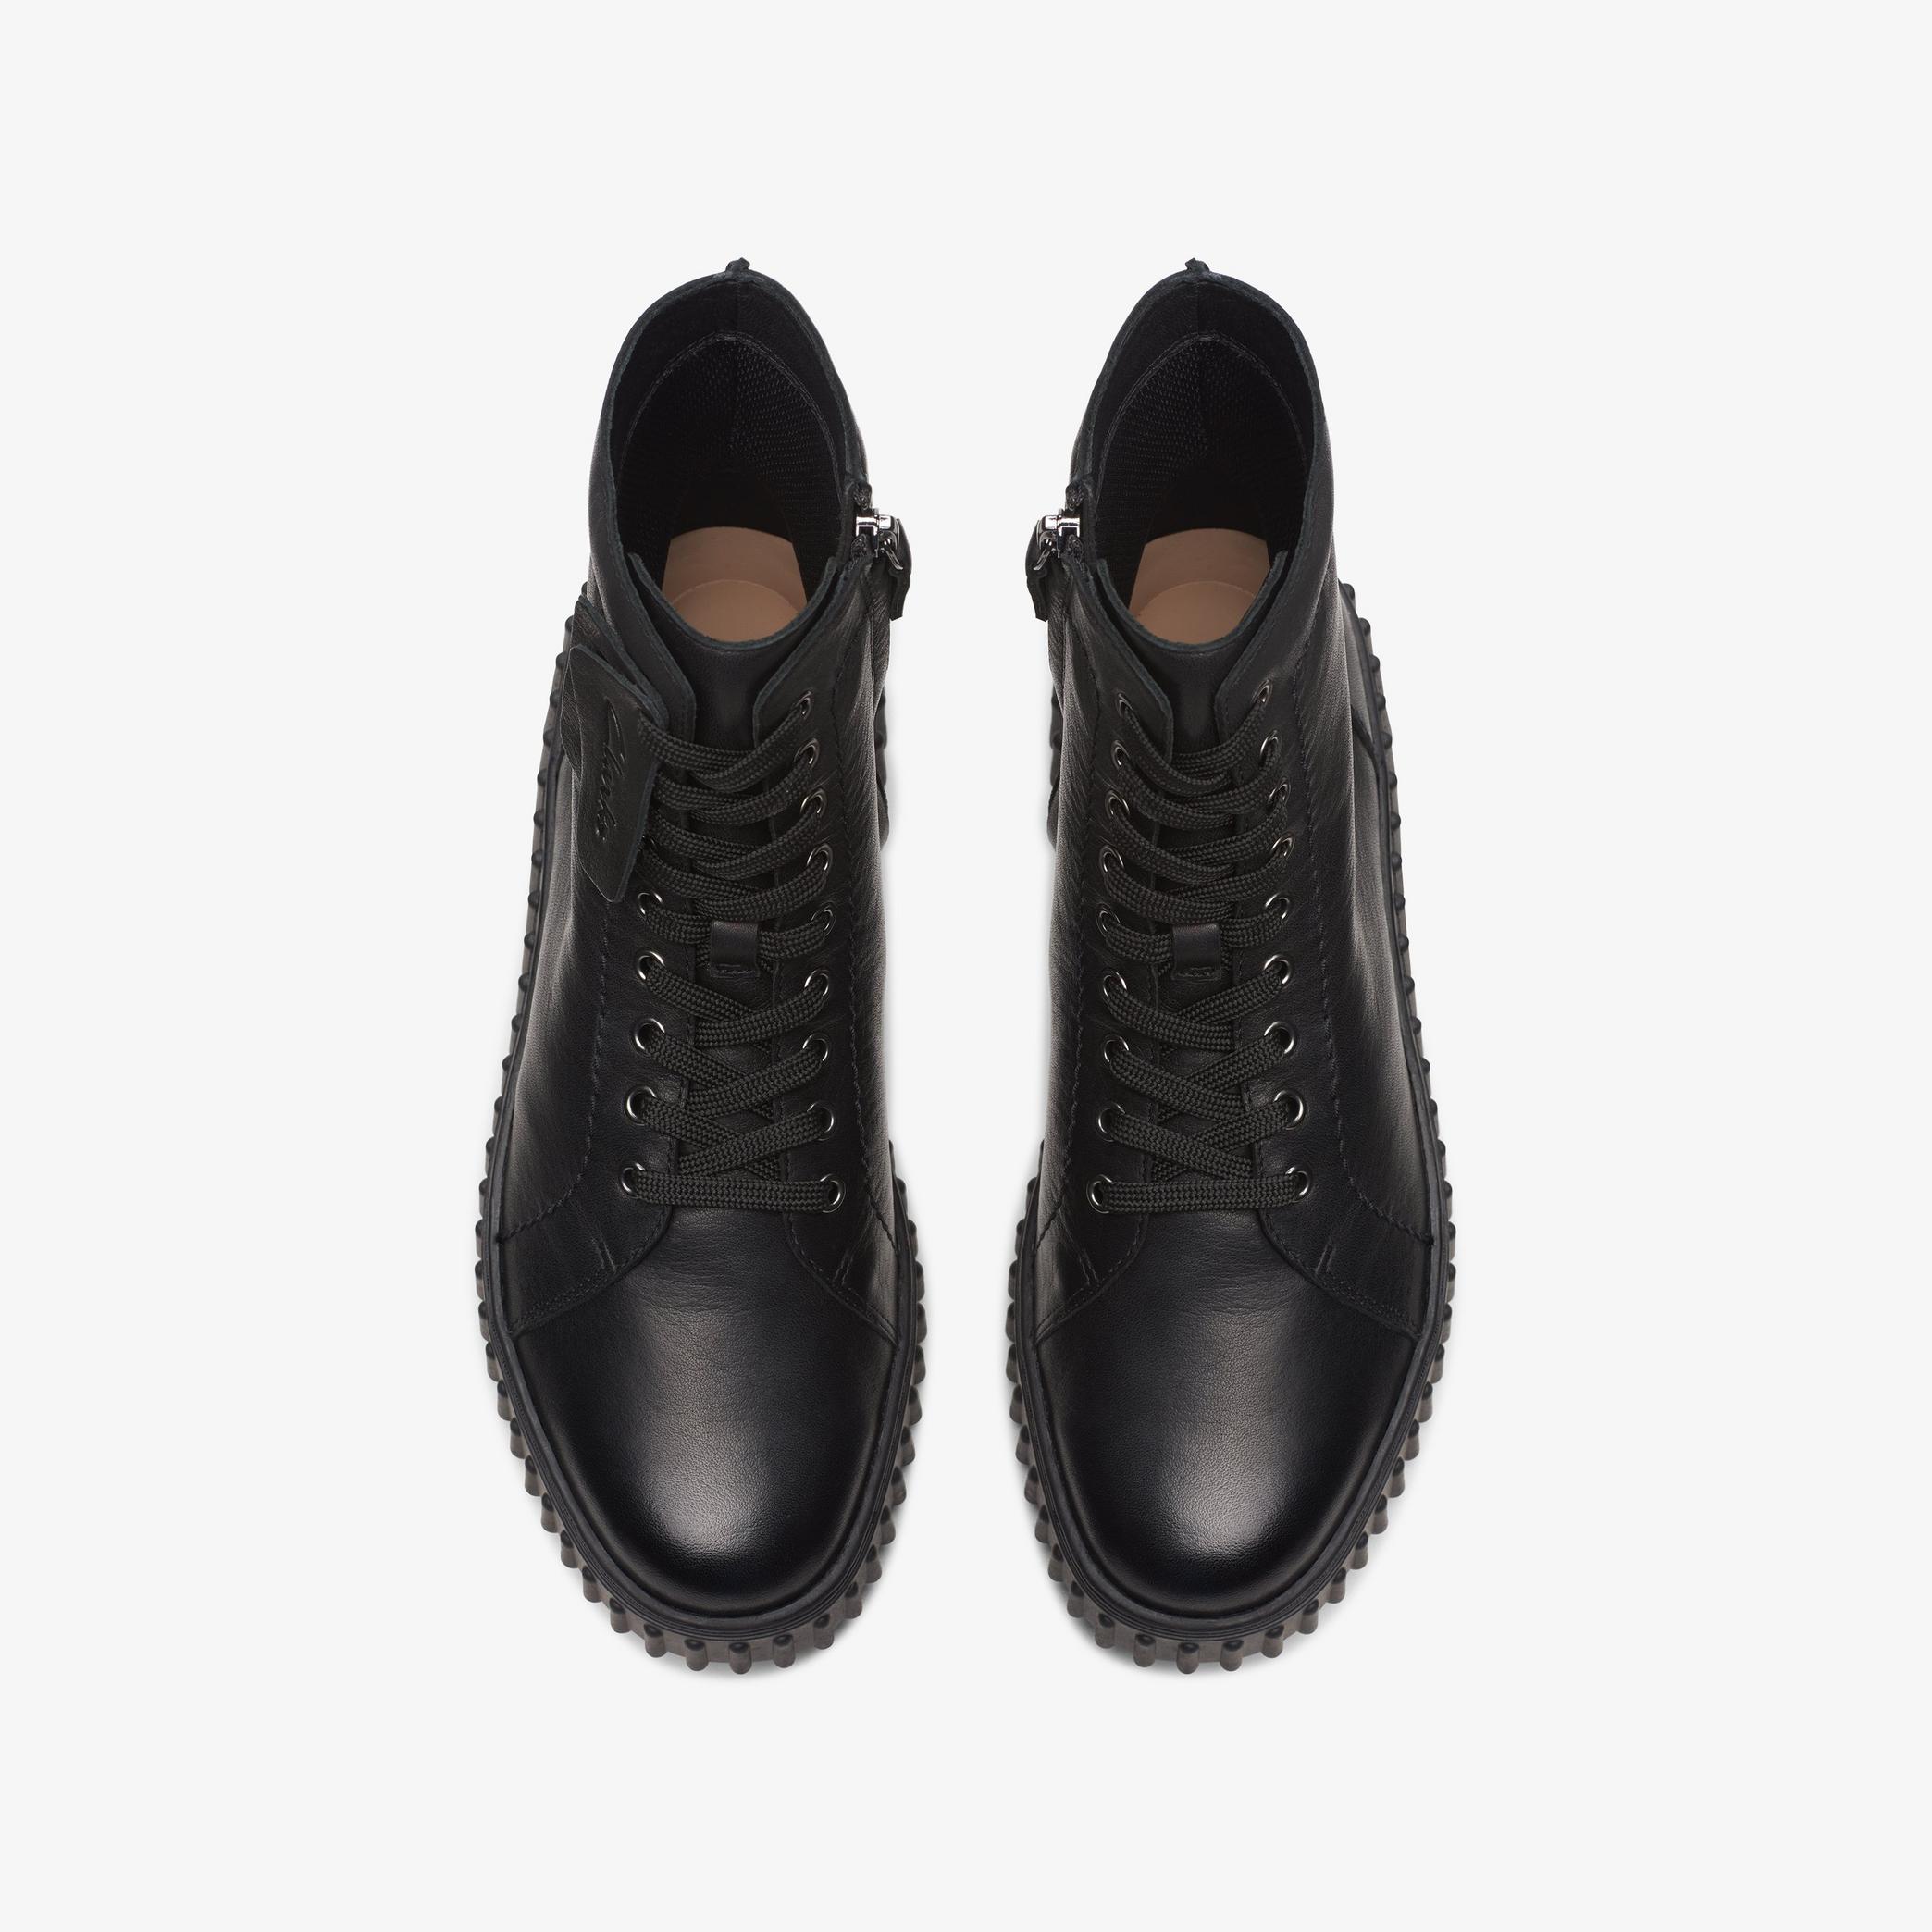 Torhill Rise Black Leather Ankle Boots, view 7 of 8